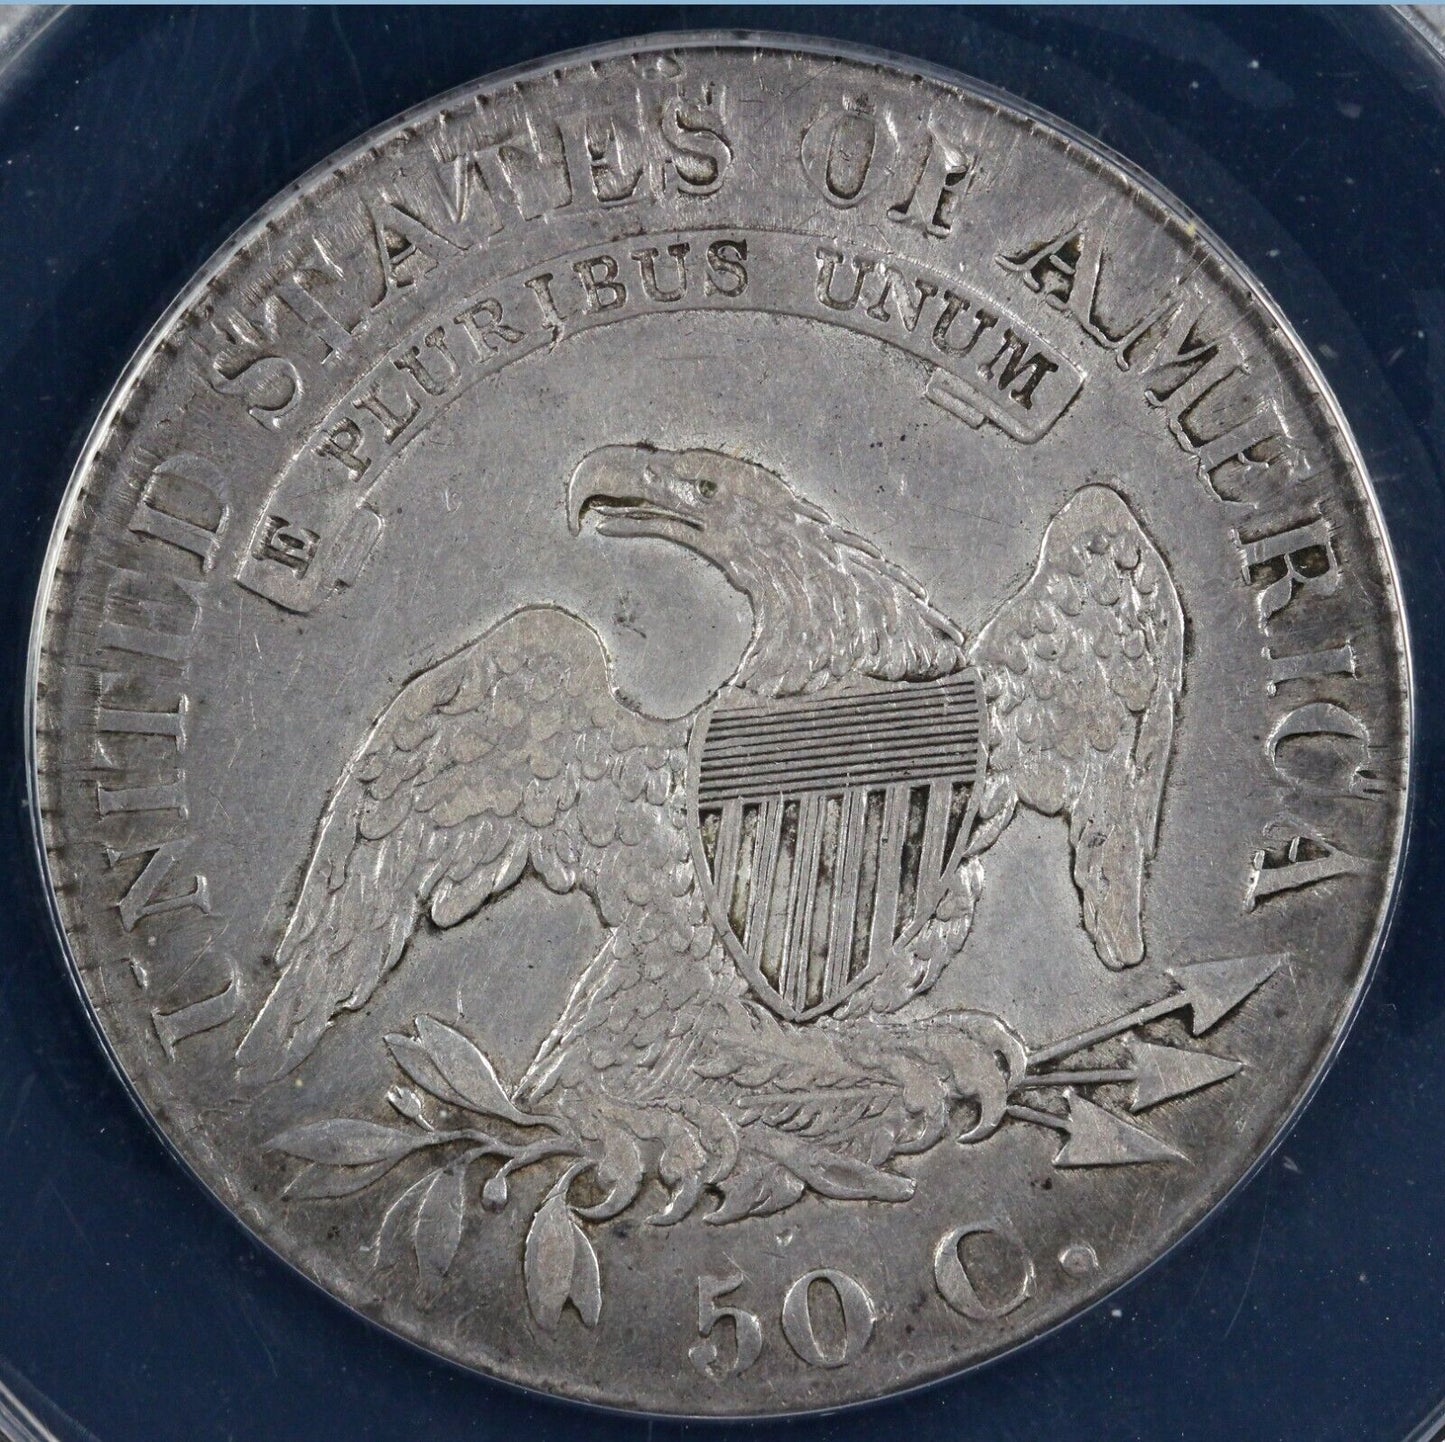 1825 50c Capped Bust Half Dollar ANACS EF 40 DETAILS CLEANED